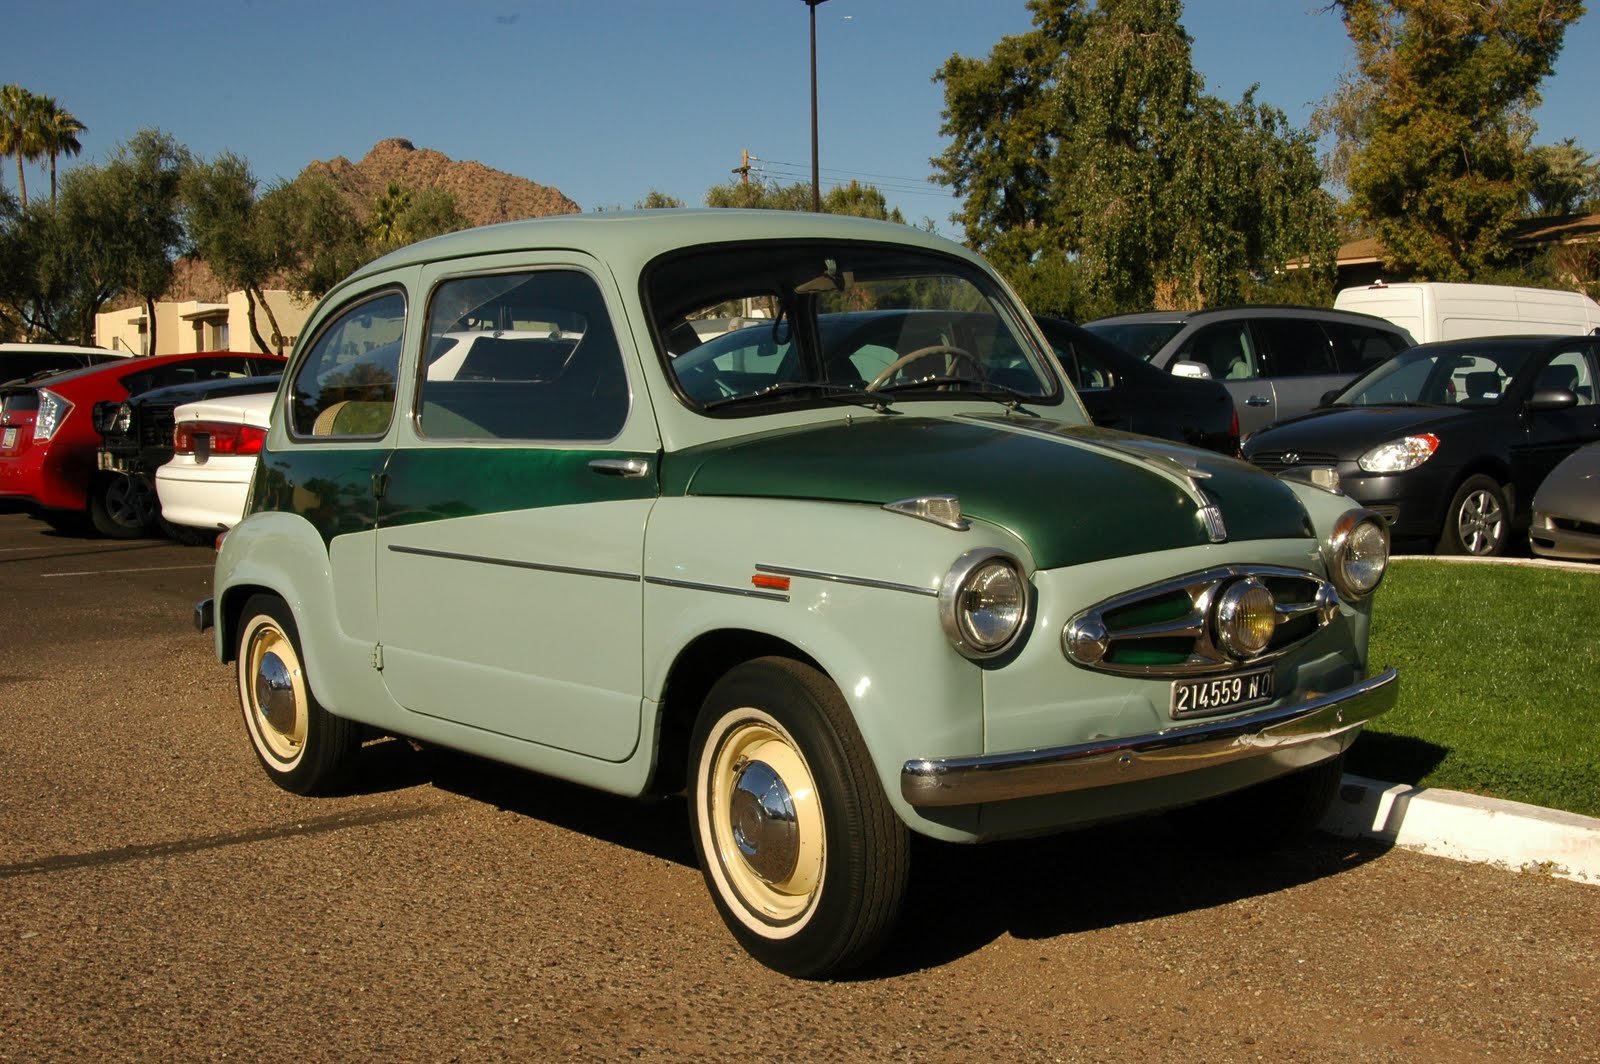 1955 Fiat 600 Multipla related infomation,specifications